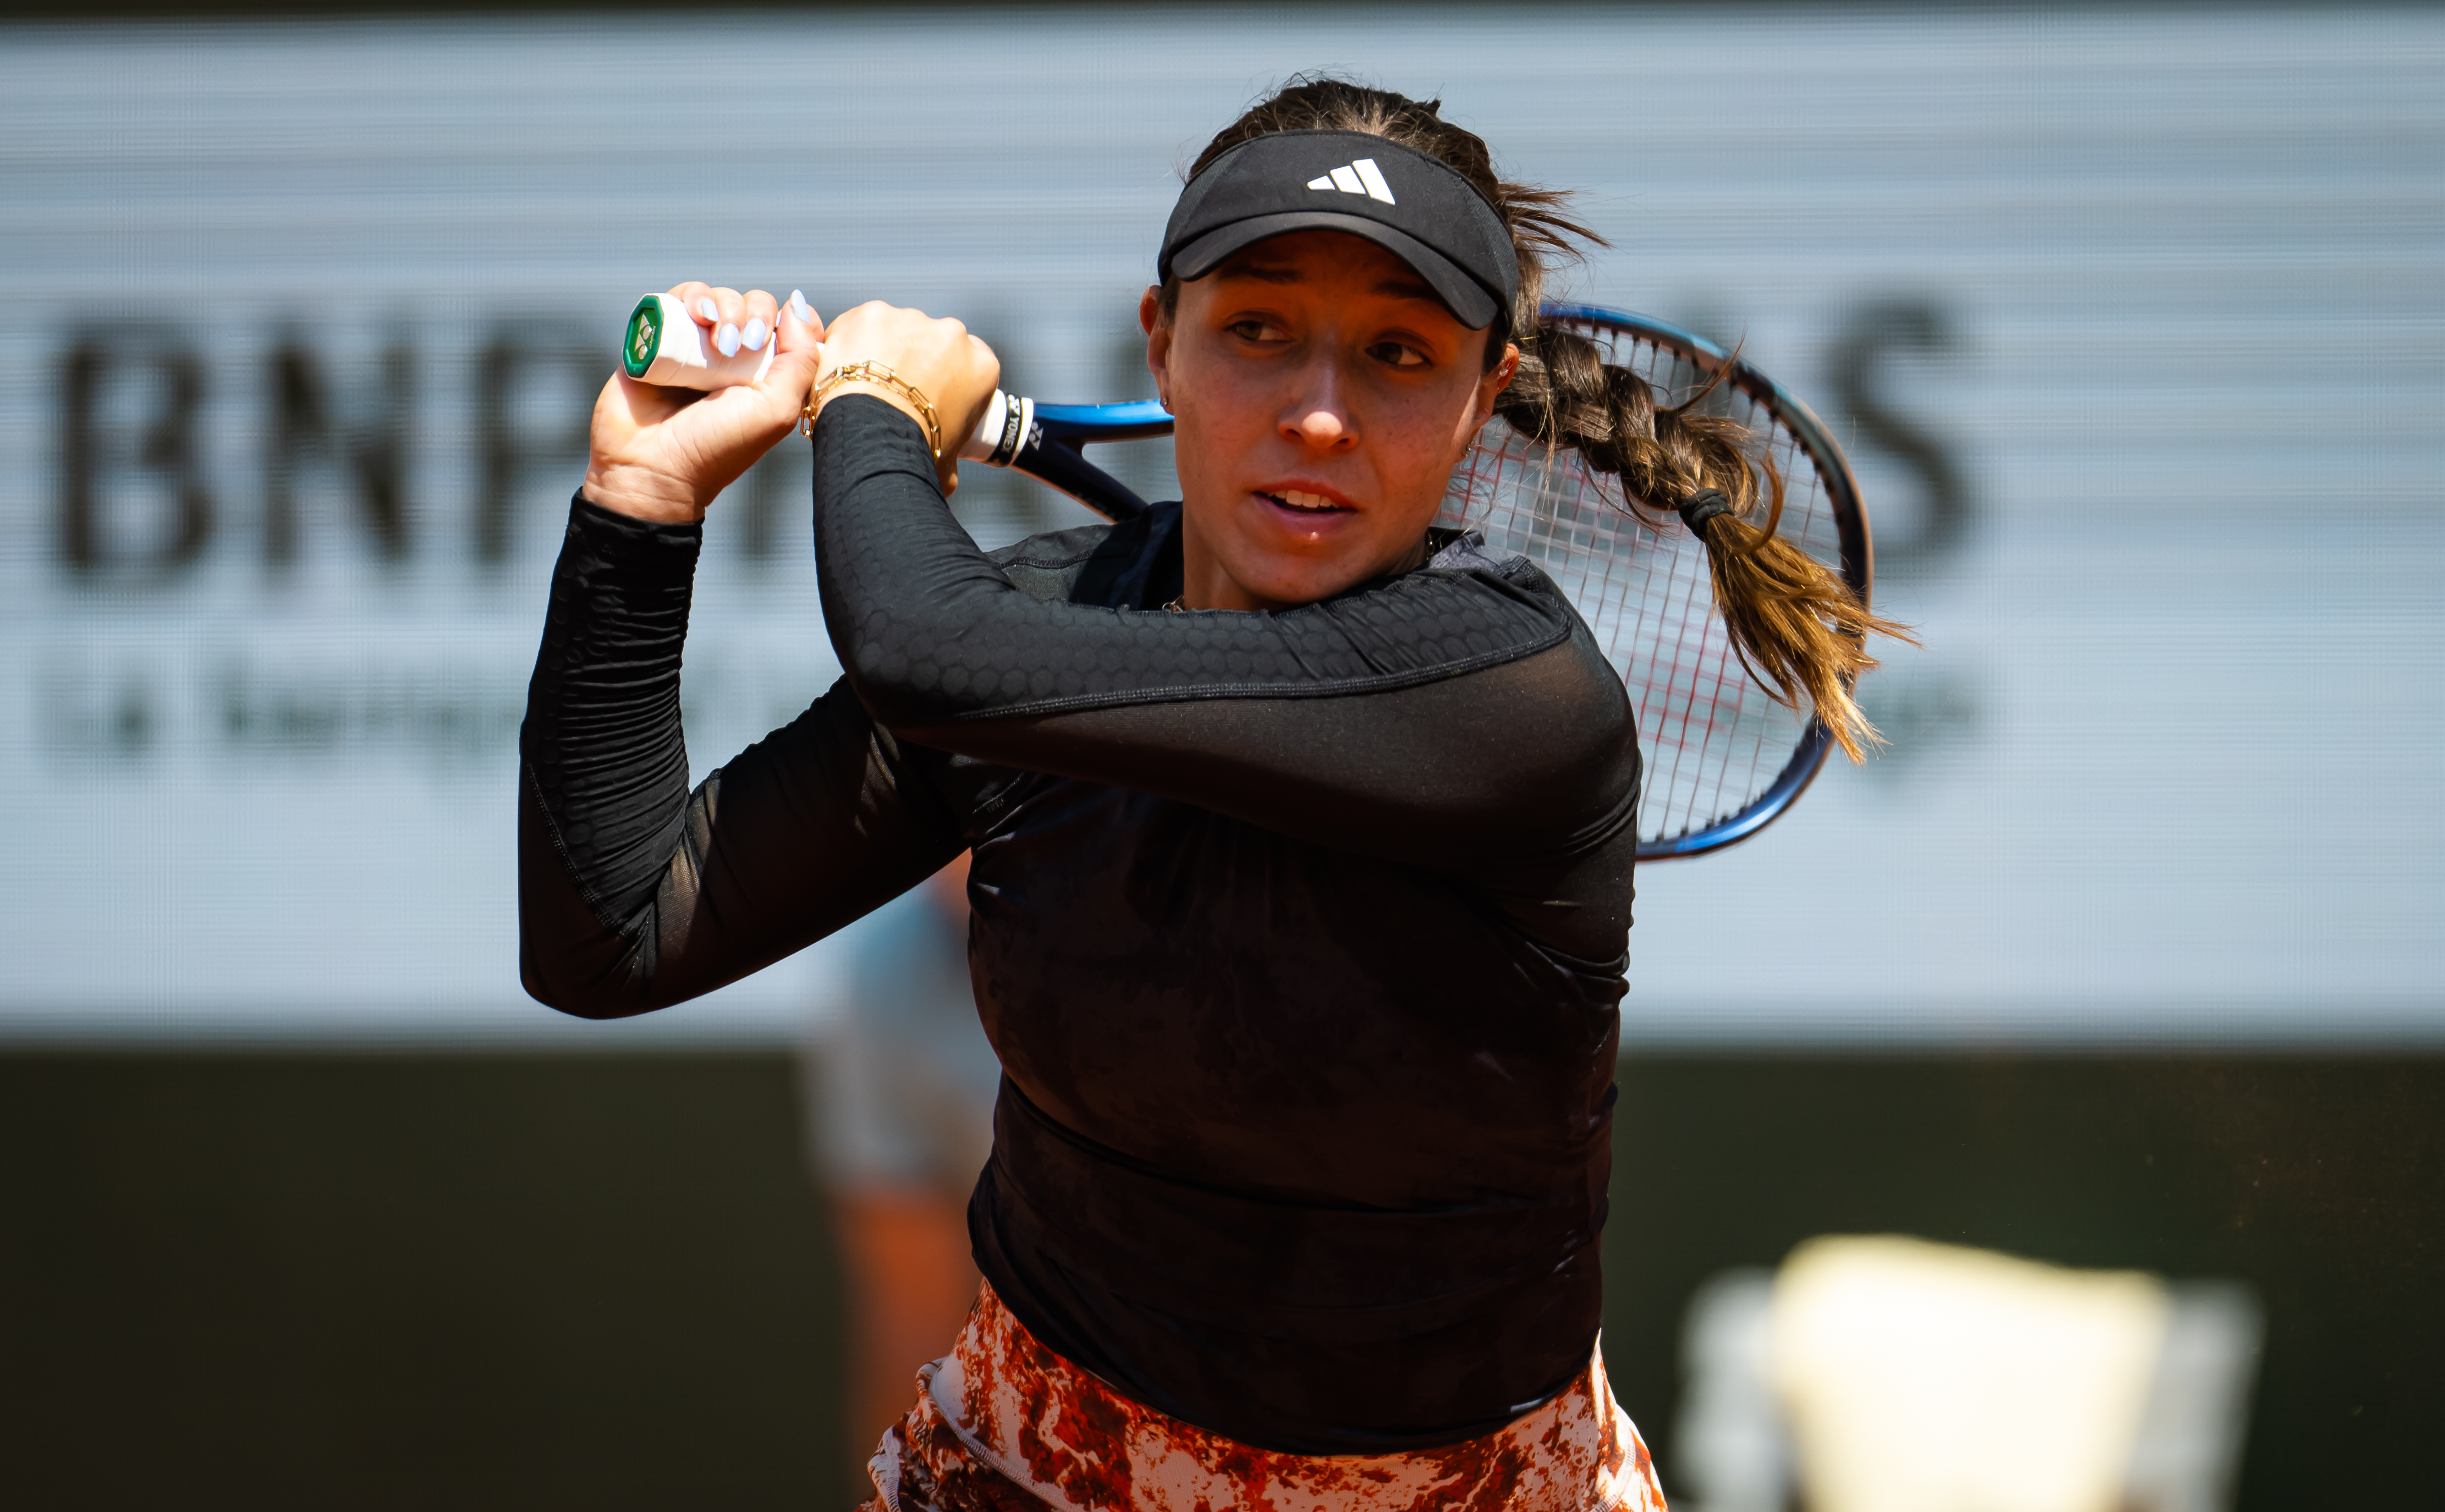 Top Ranked American Jessica Pegula Upset by Elise Mertens at French Open